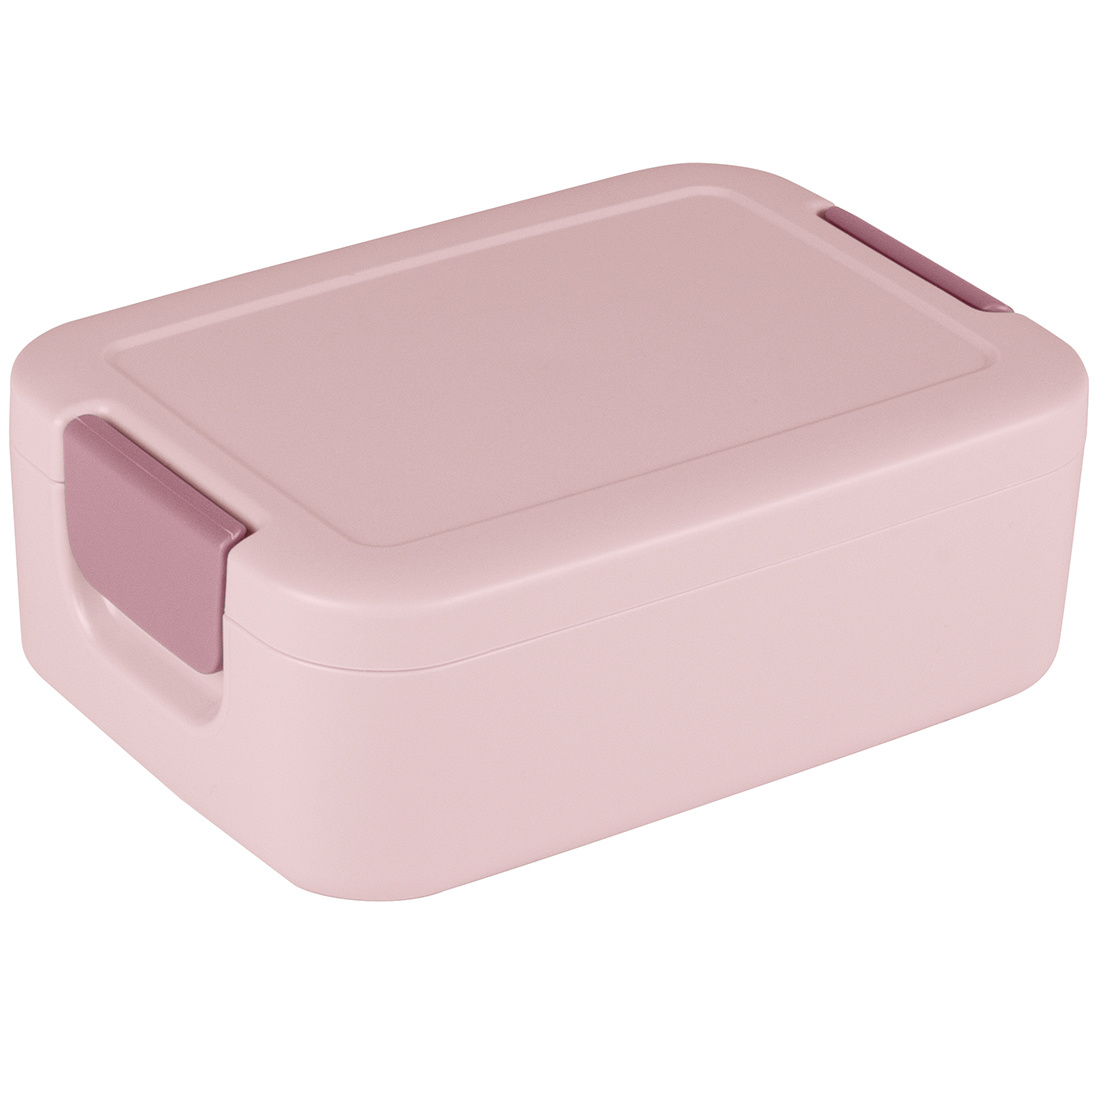 Sigma home Food to go broodtrommel roze